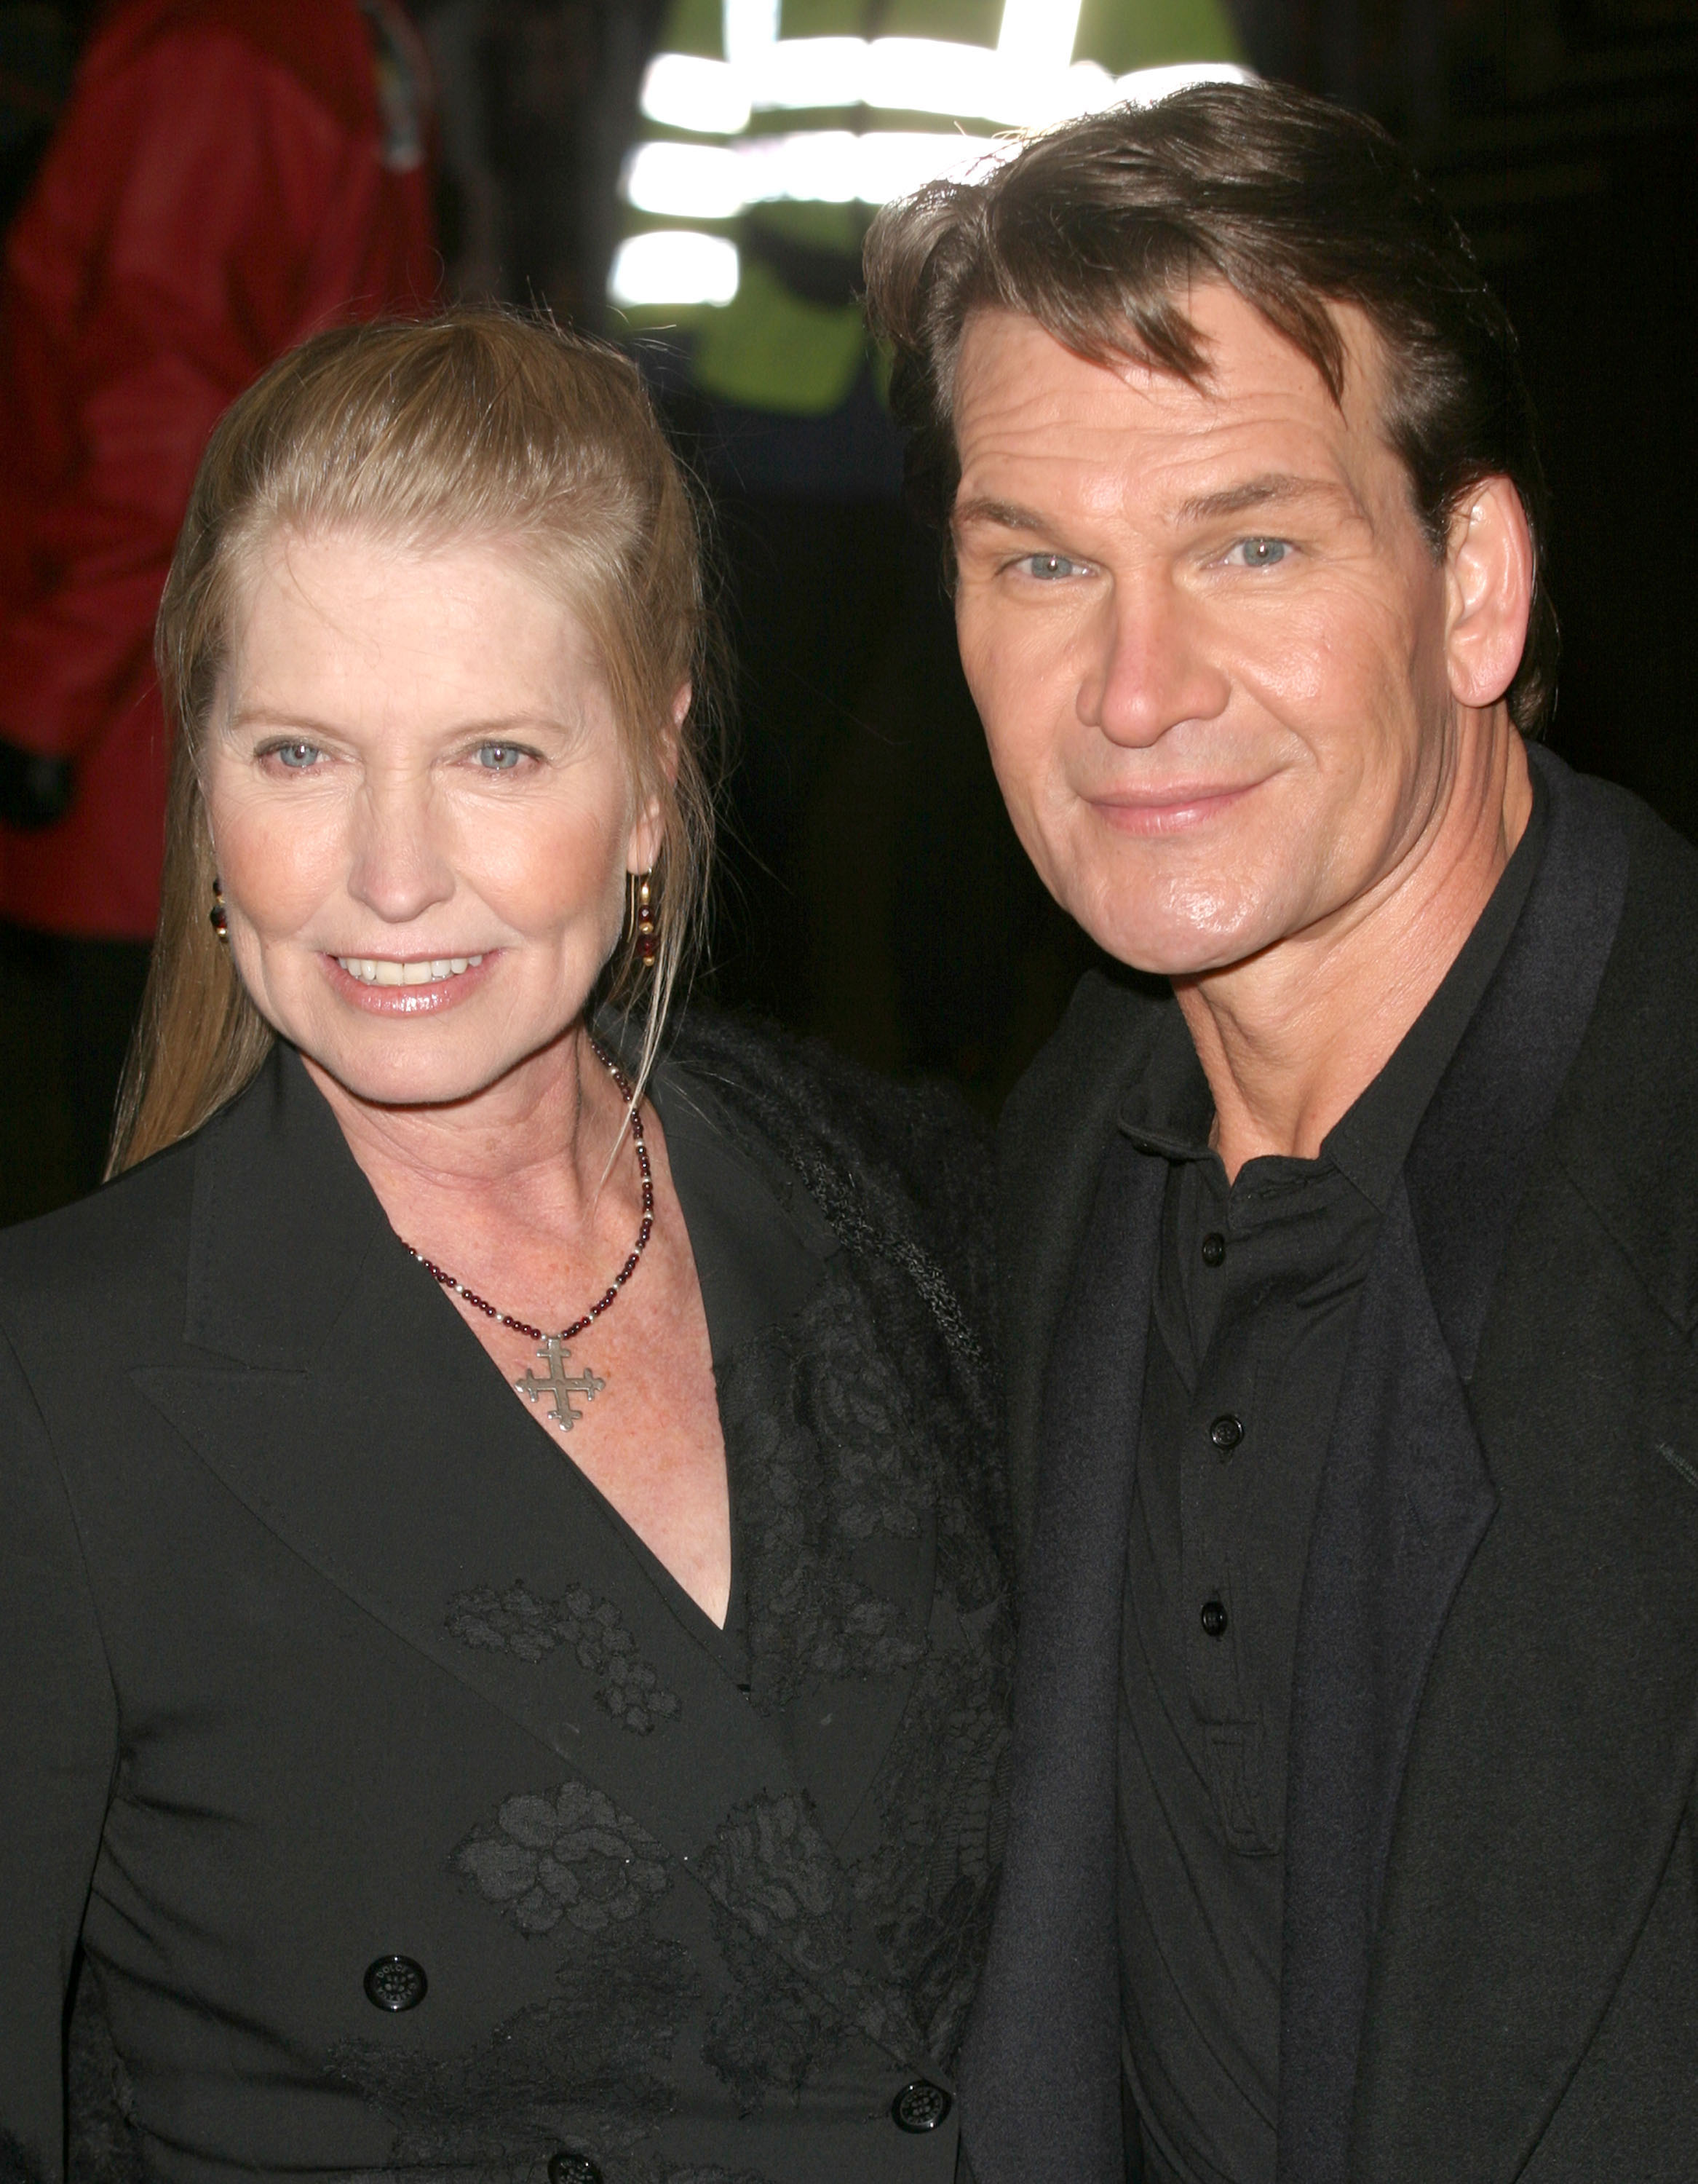 Lisa Niemi and Patrick Swayze at the London premiere of "Keeping Mum," 2005  | Source: Getty Images